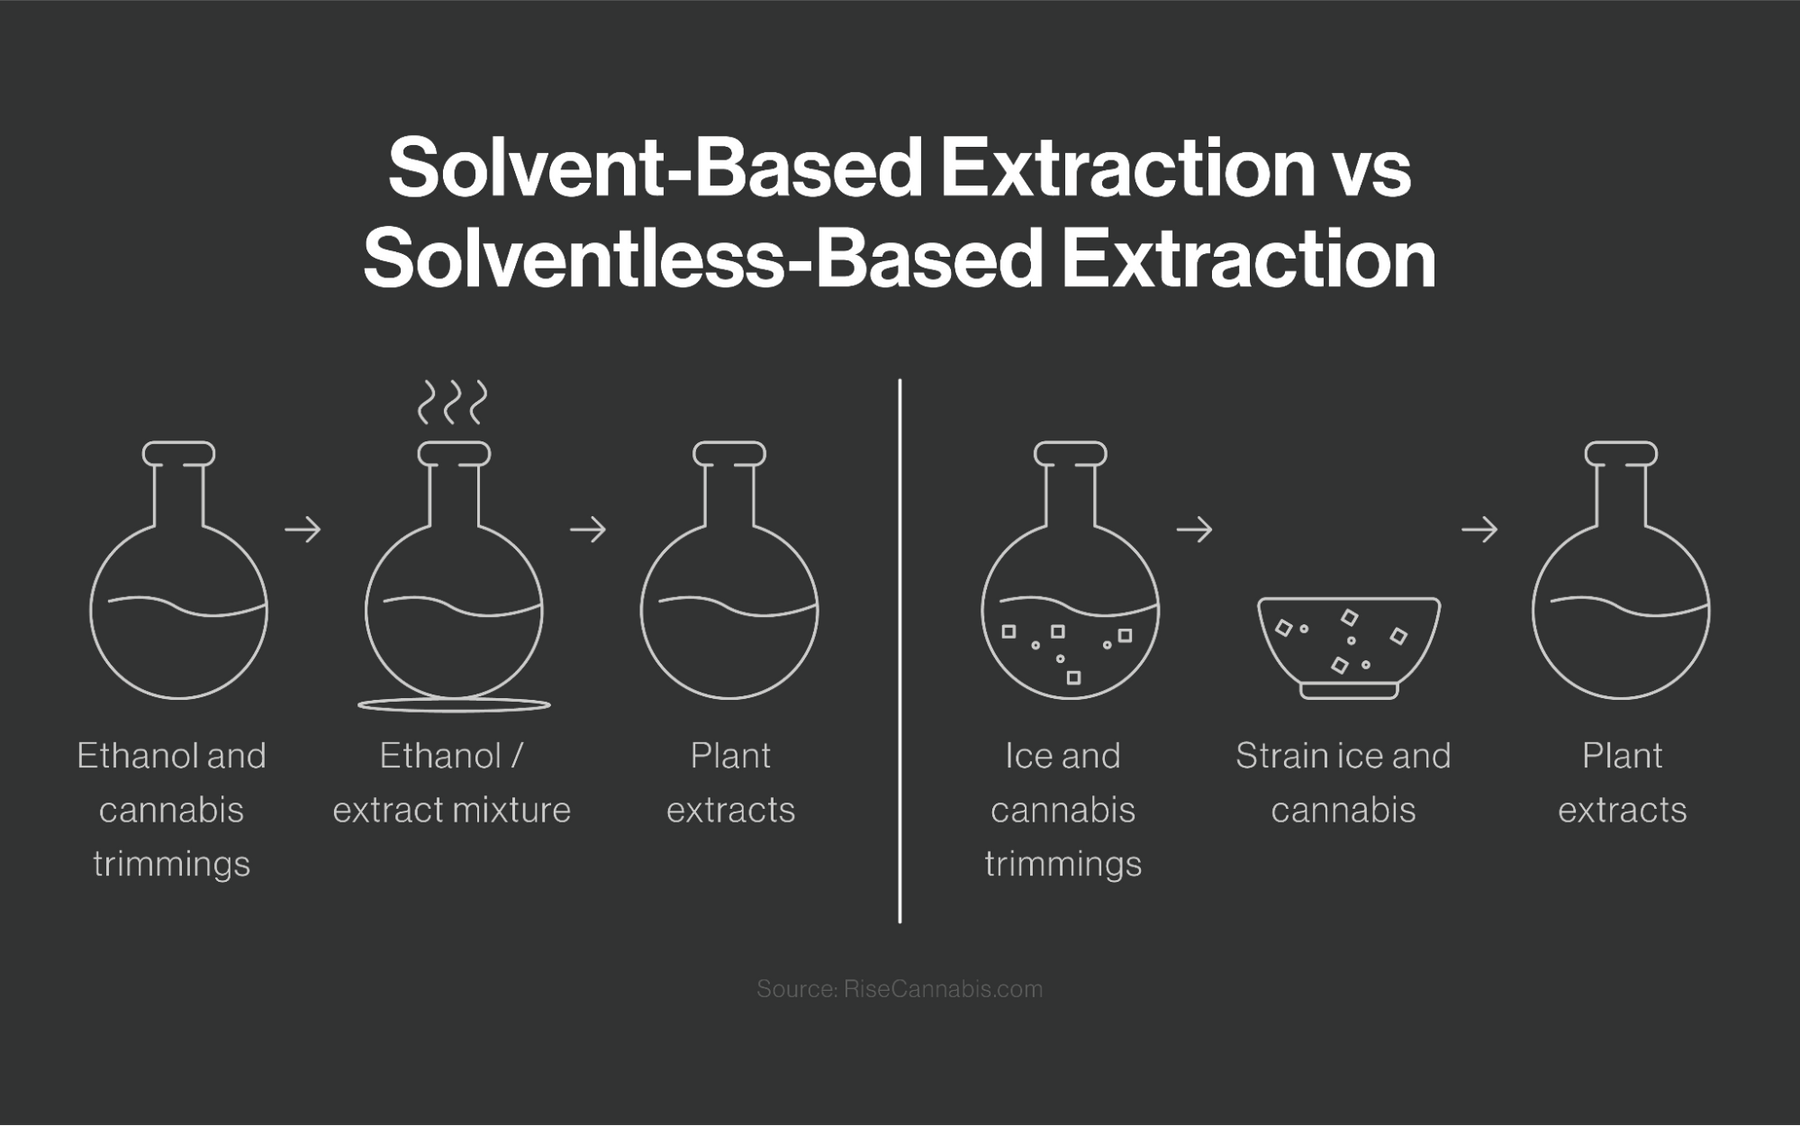 Solvent-Based Extraction vs Solventless-Based Extraction